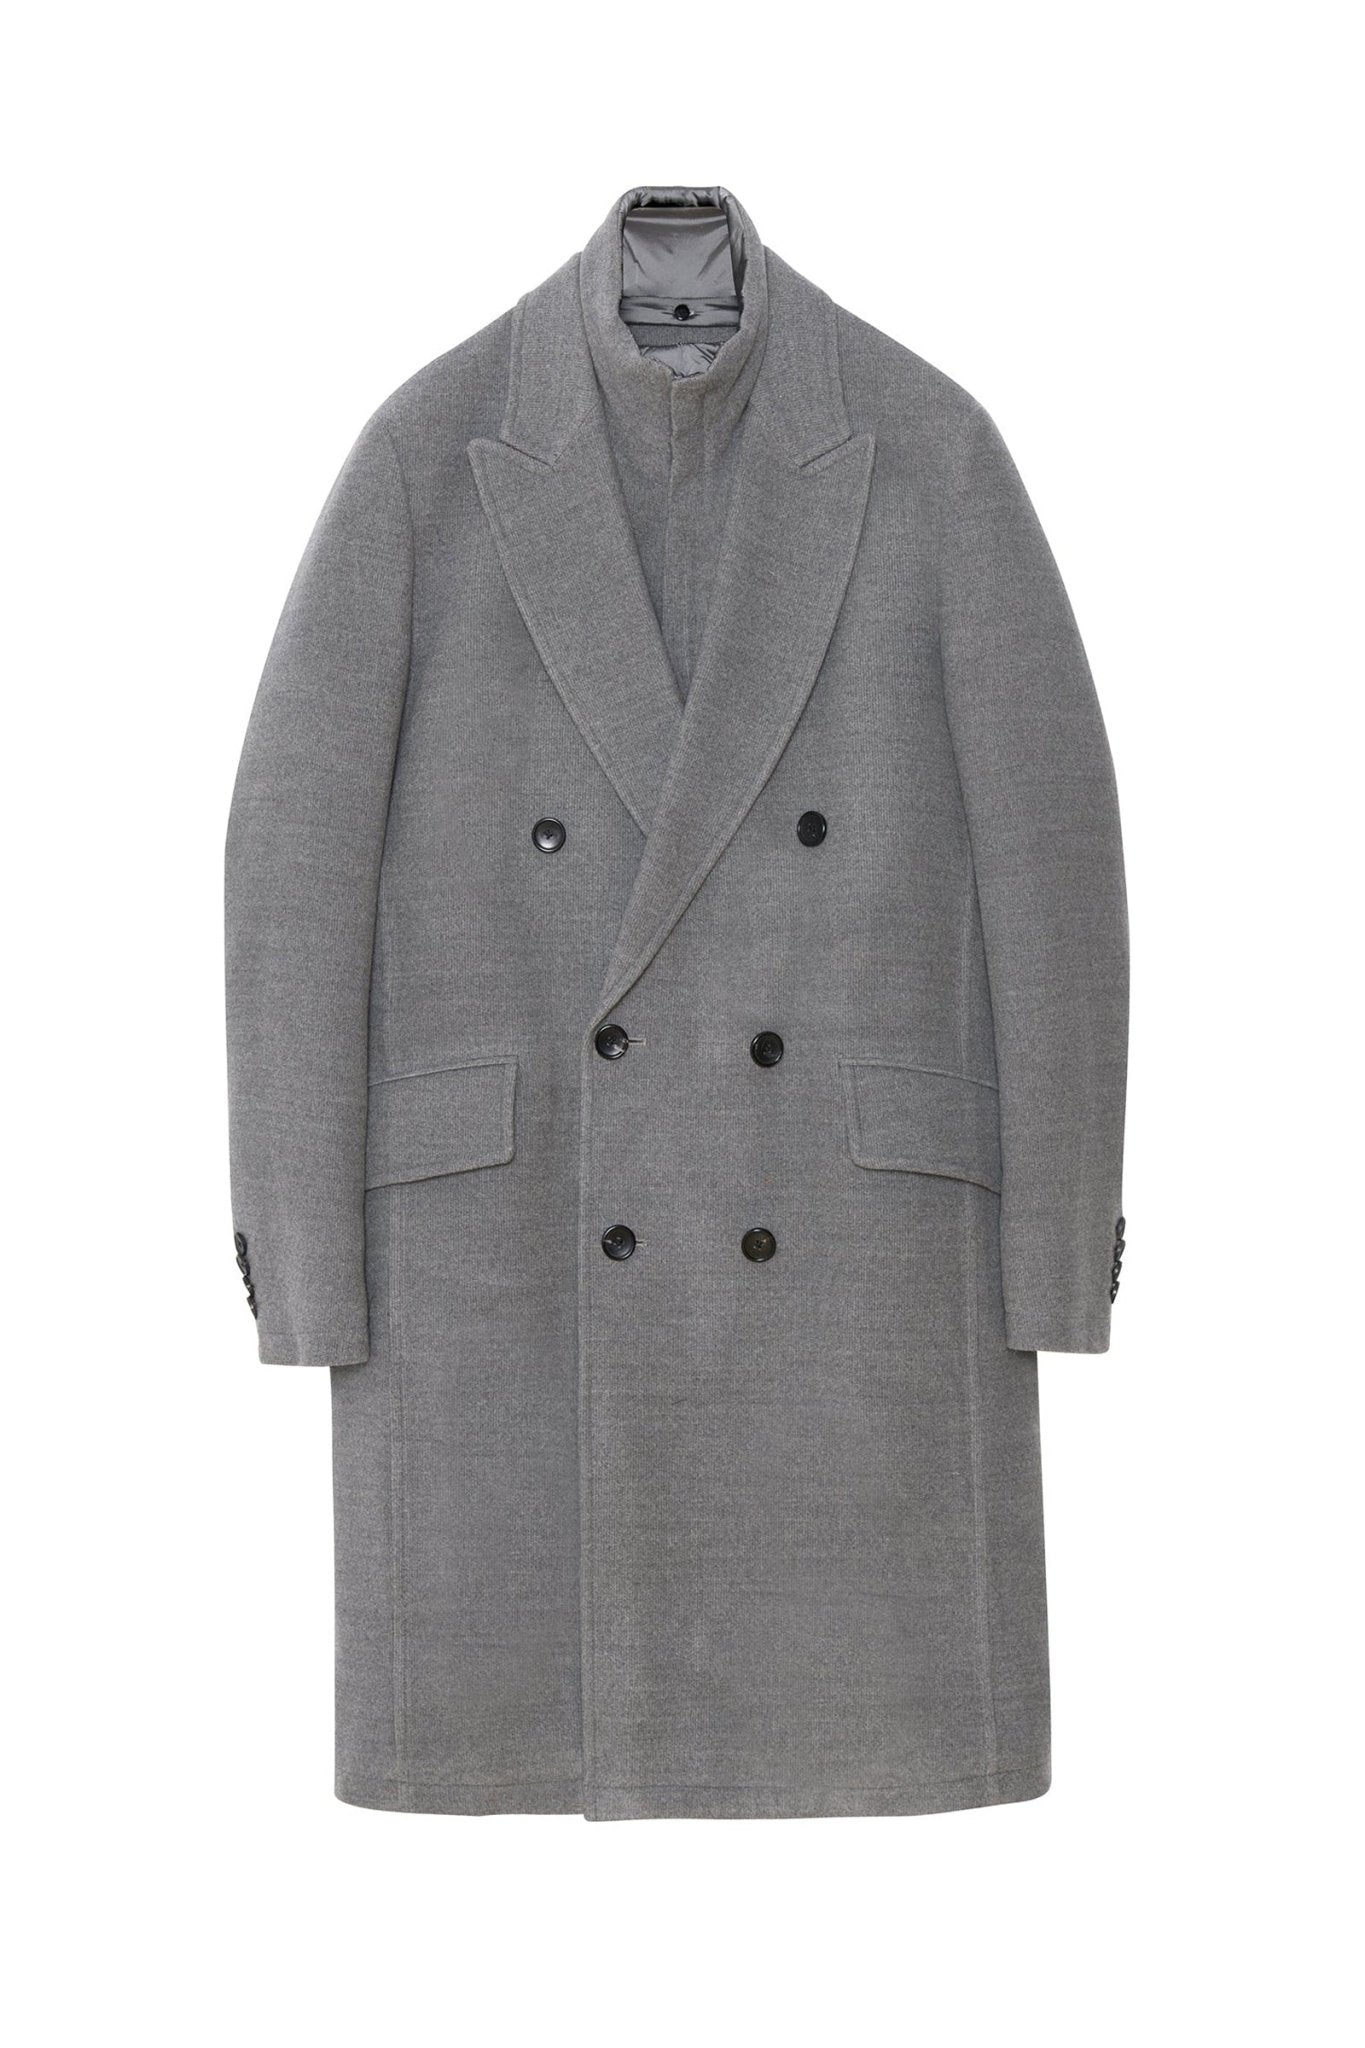 LIMITED EDITION: TOWNSEND GREY WOOL OVERCOAT - Cardinal of Canada-US-LIMITED EDITION: TOWNSEND GREY WOOL TOPCOAT